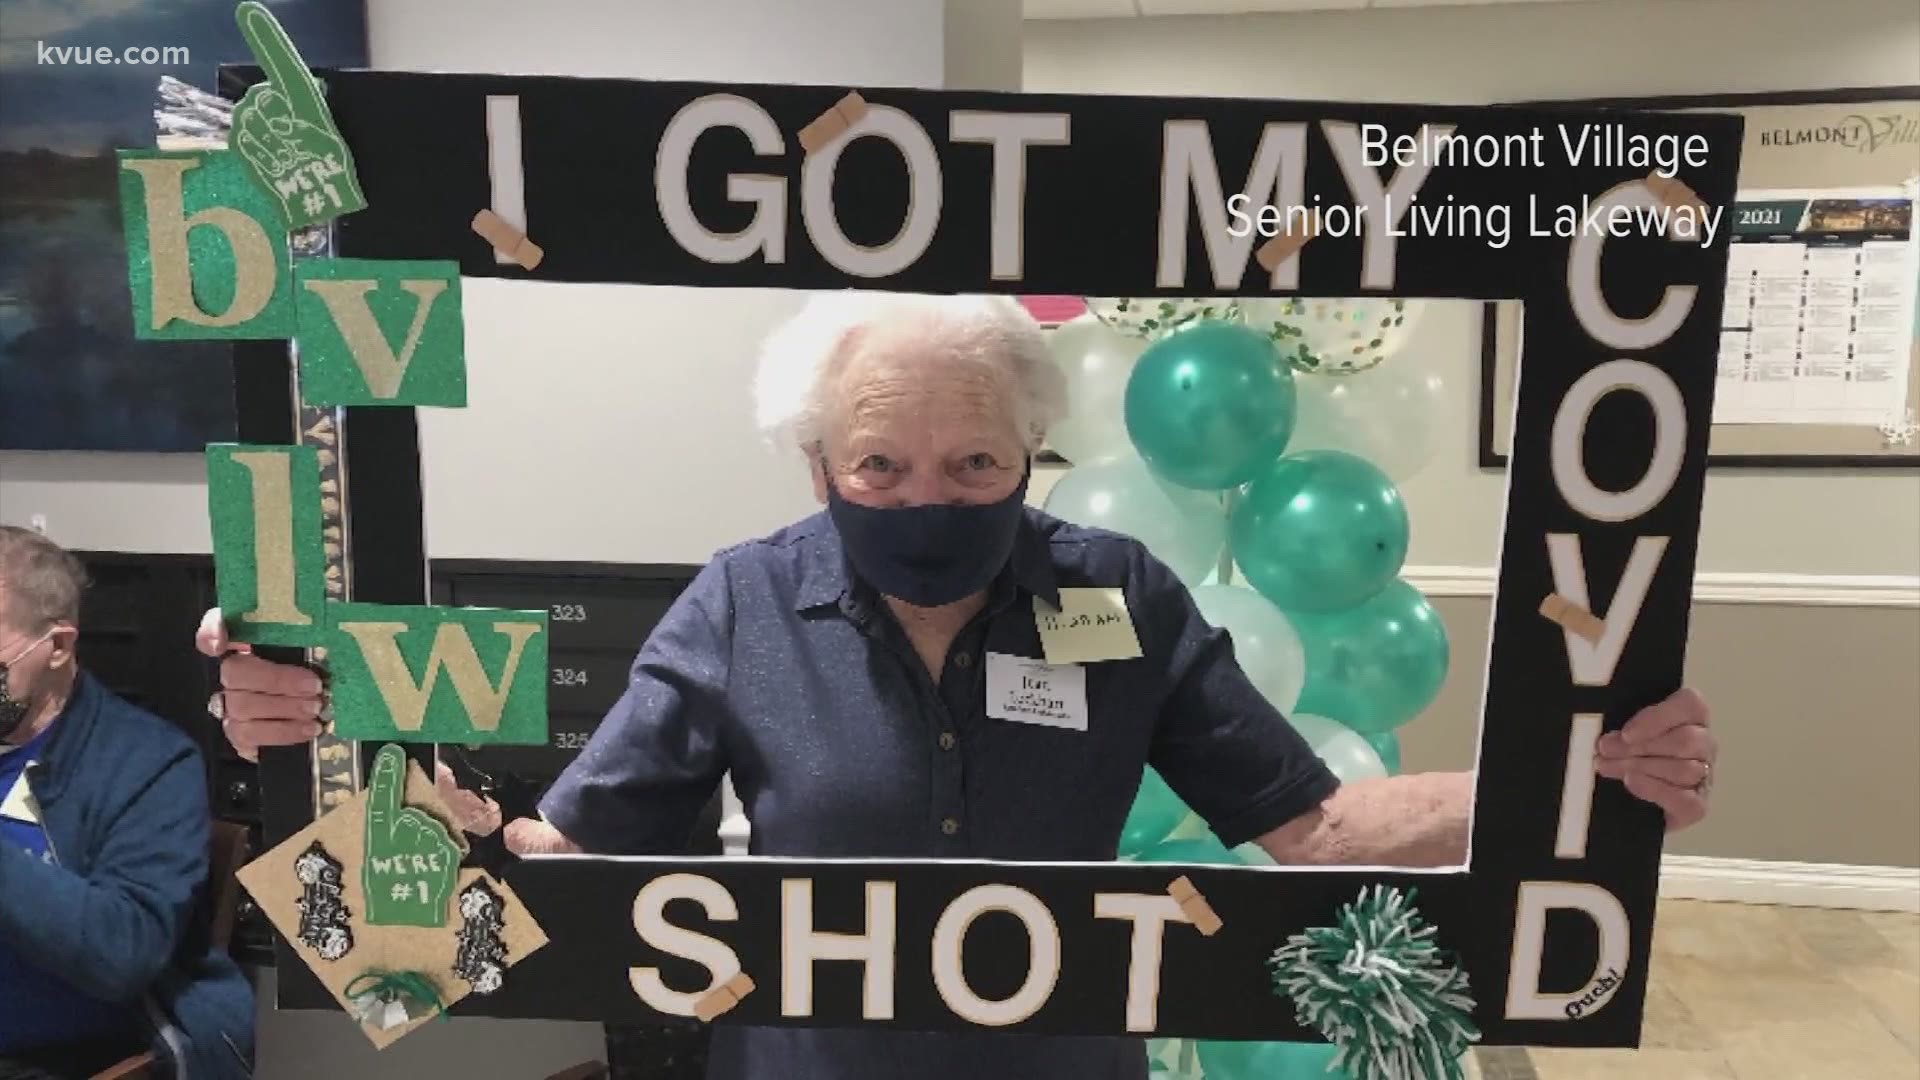 As many still wait to get a vaccine, one senior living facility in Central Texas is celebrating residents getting their second doses.